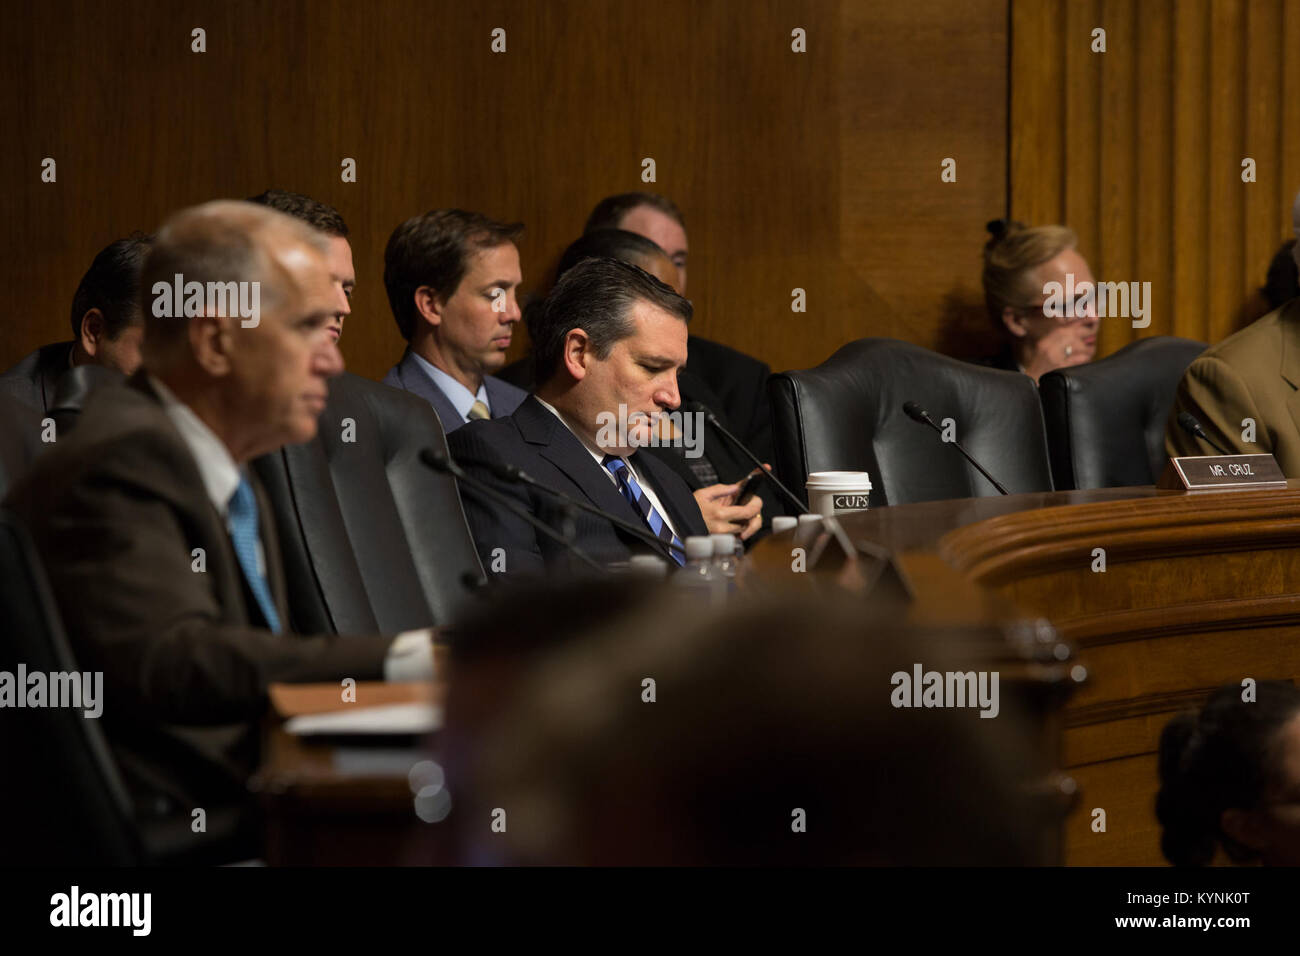 U.S. Customs and Border Protection, USBP Acting Chief Carla Provost testified before the Judiciary Committee hearing on the subject &quot;The MS-13 Problem: Investigating Gang Membership, its Nexus to Illegal Immigration, and Federal Efforts to End the Threat&quot; at the Dirksen Senate Office Building. Seen here Senator Ted Cruz and other Senate members listen to testimony.  Photographer: Donna Burton Stock Photo